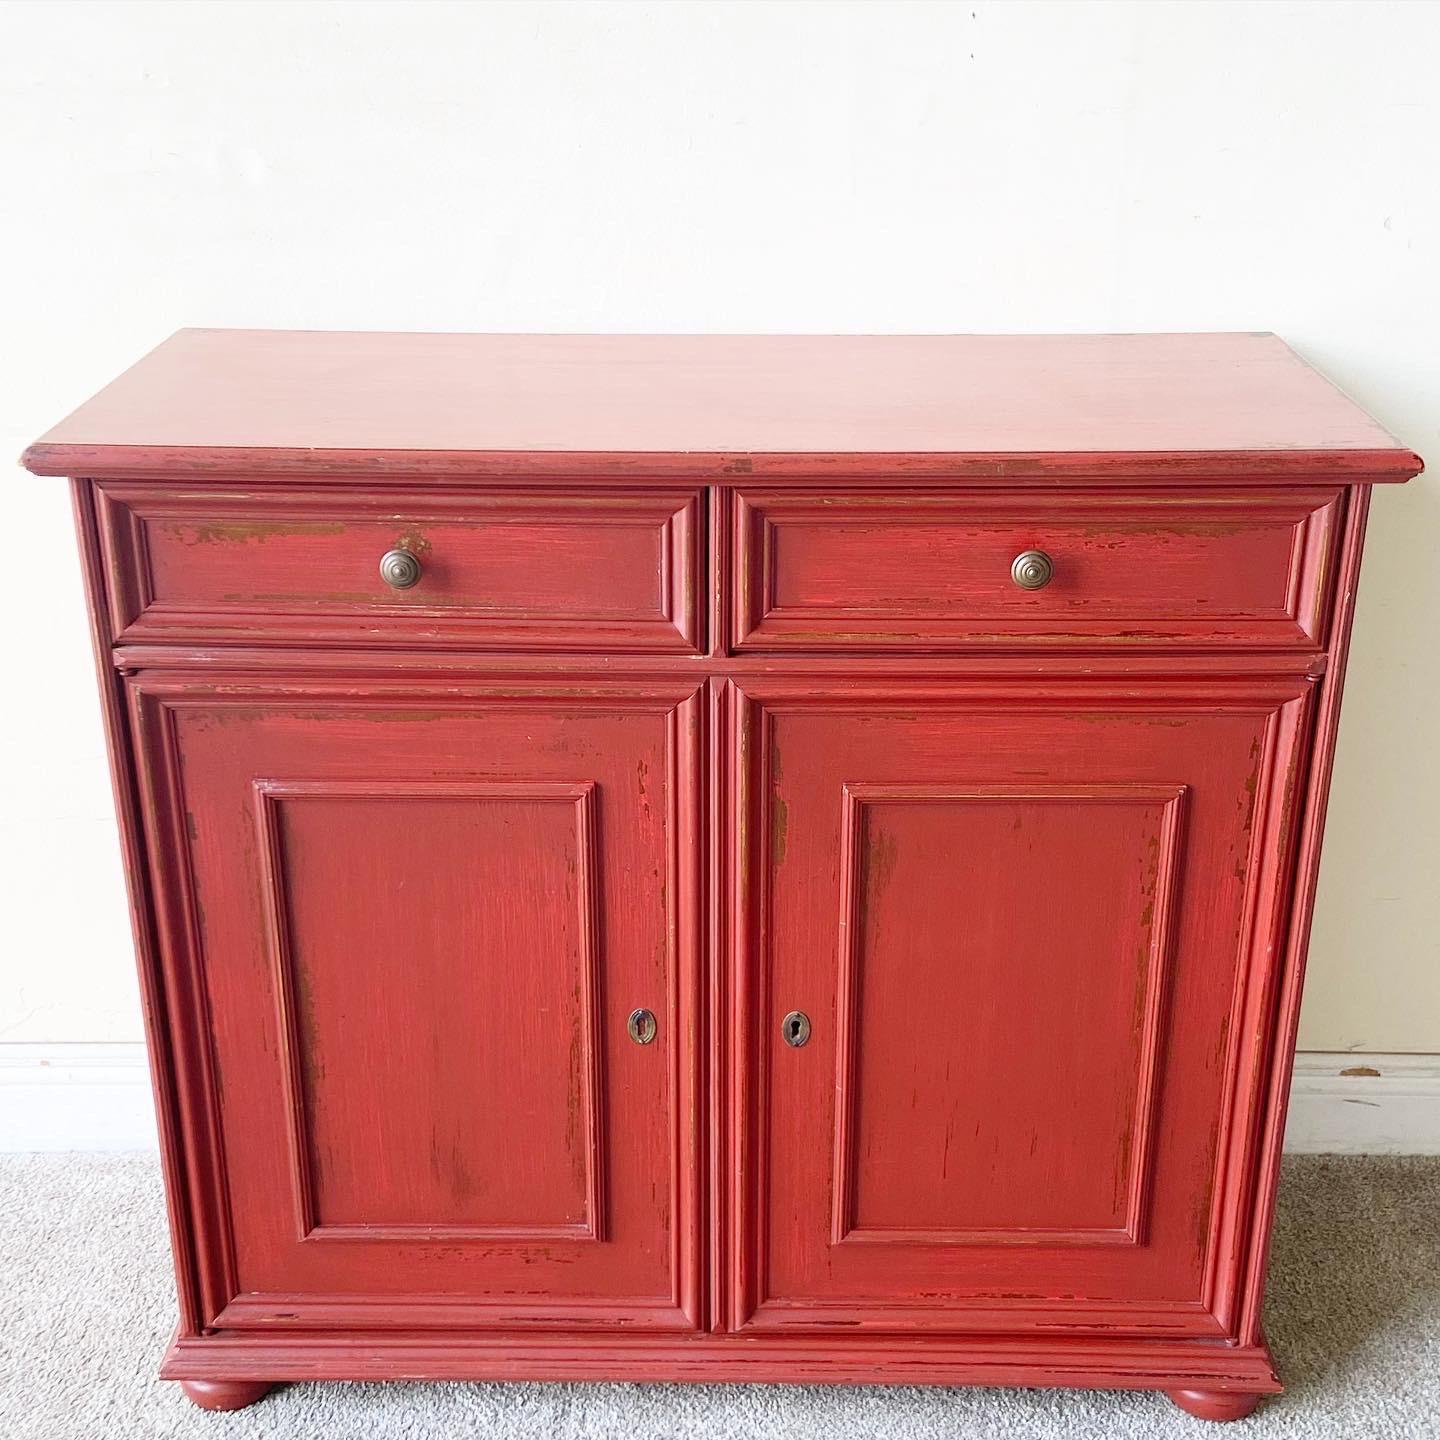 Rustic Italian Distressed Red Sideboard by Buying & Design